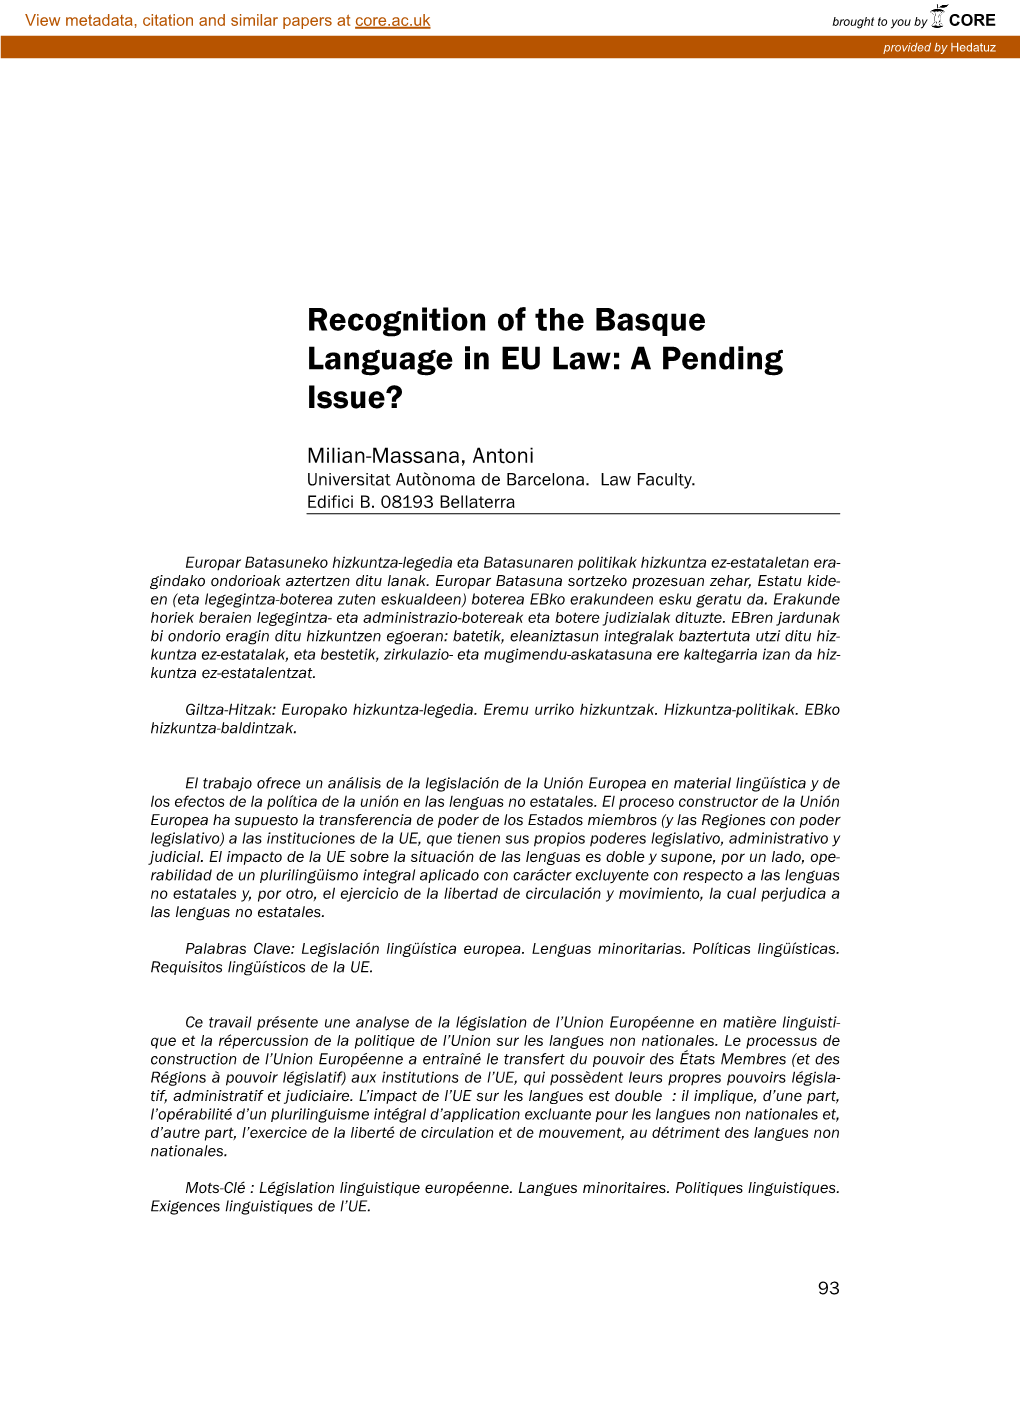 Recognition of the Basque Language in EU Law: a Pending Issue?